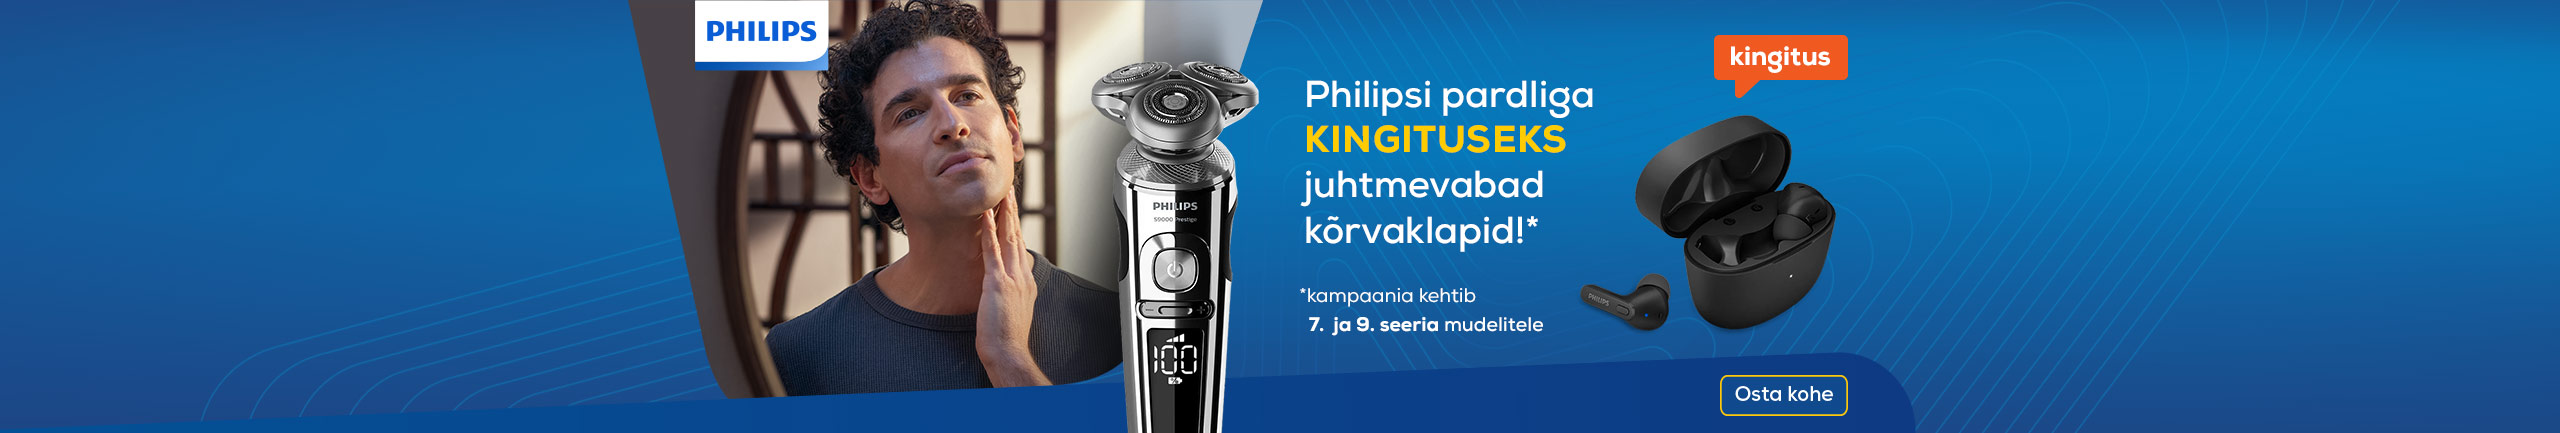 Buy Philips shaver and receive earpods as a gift!